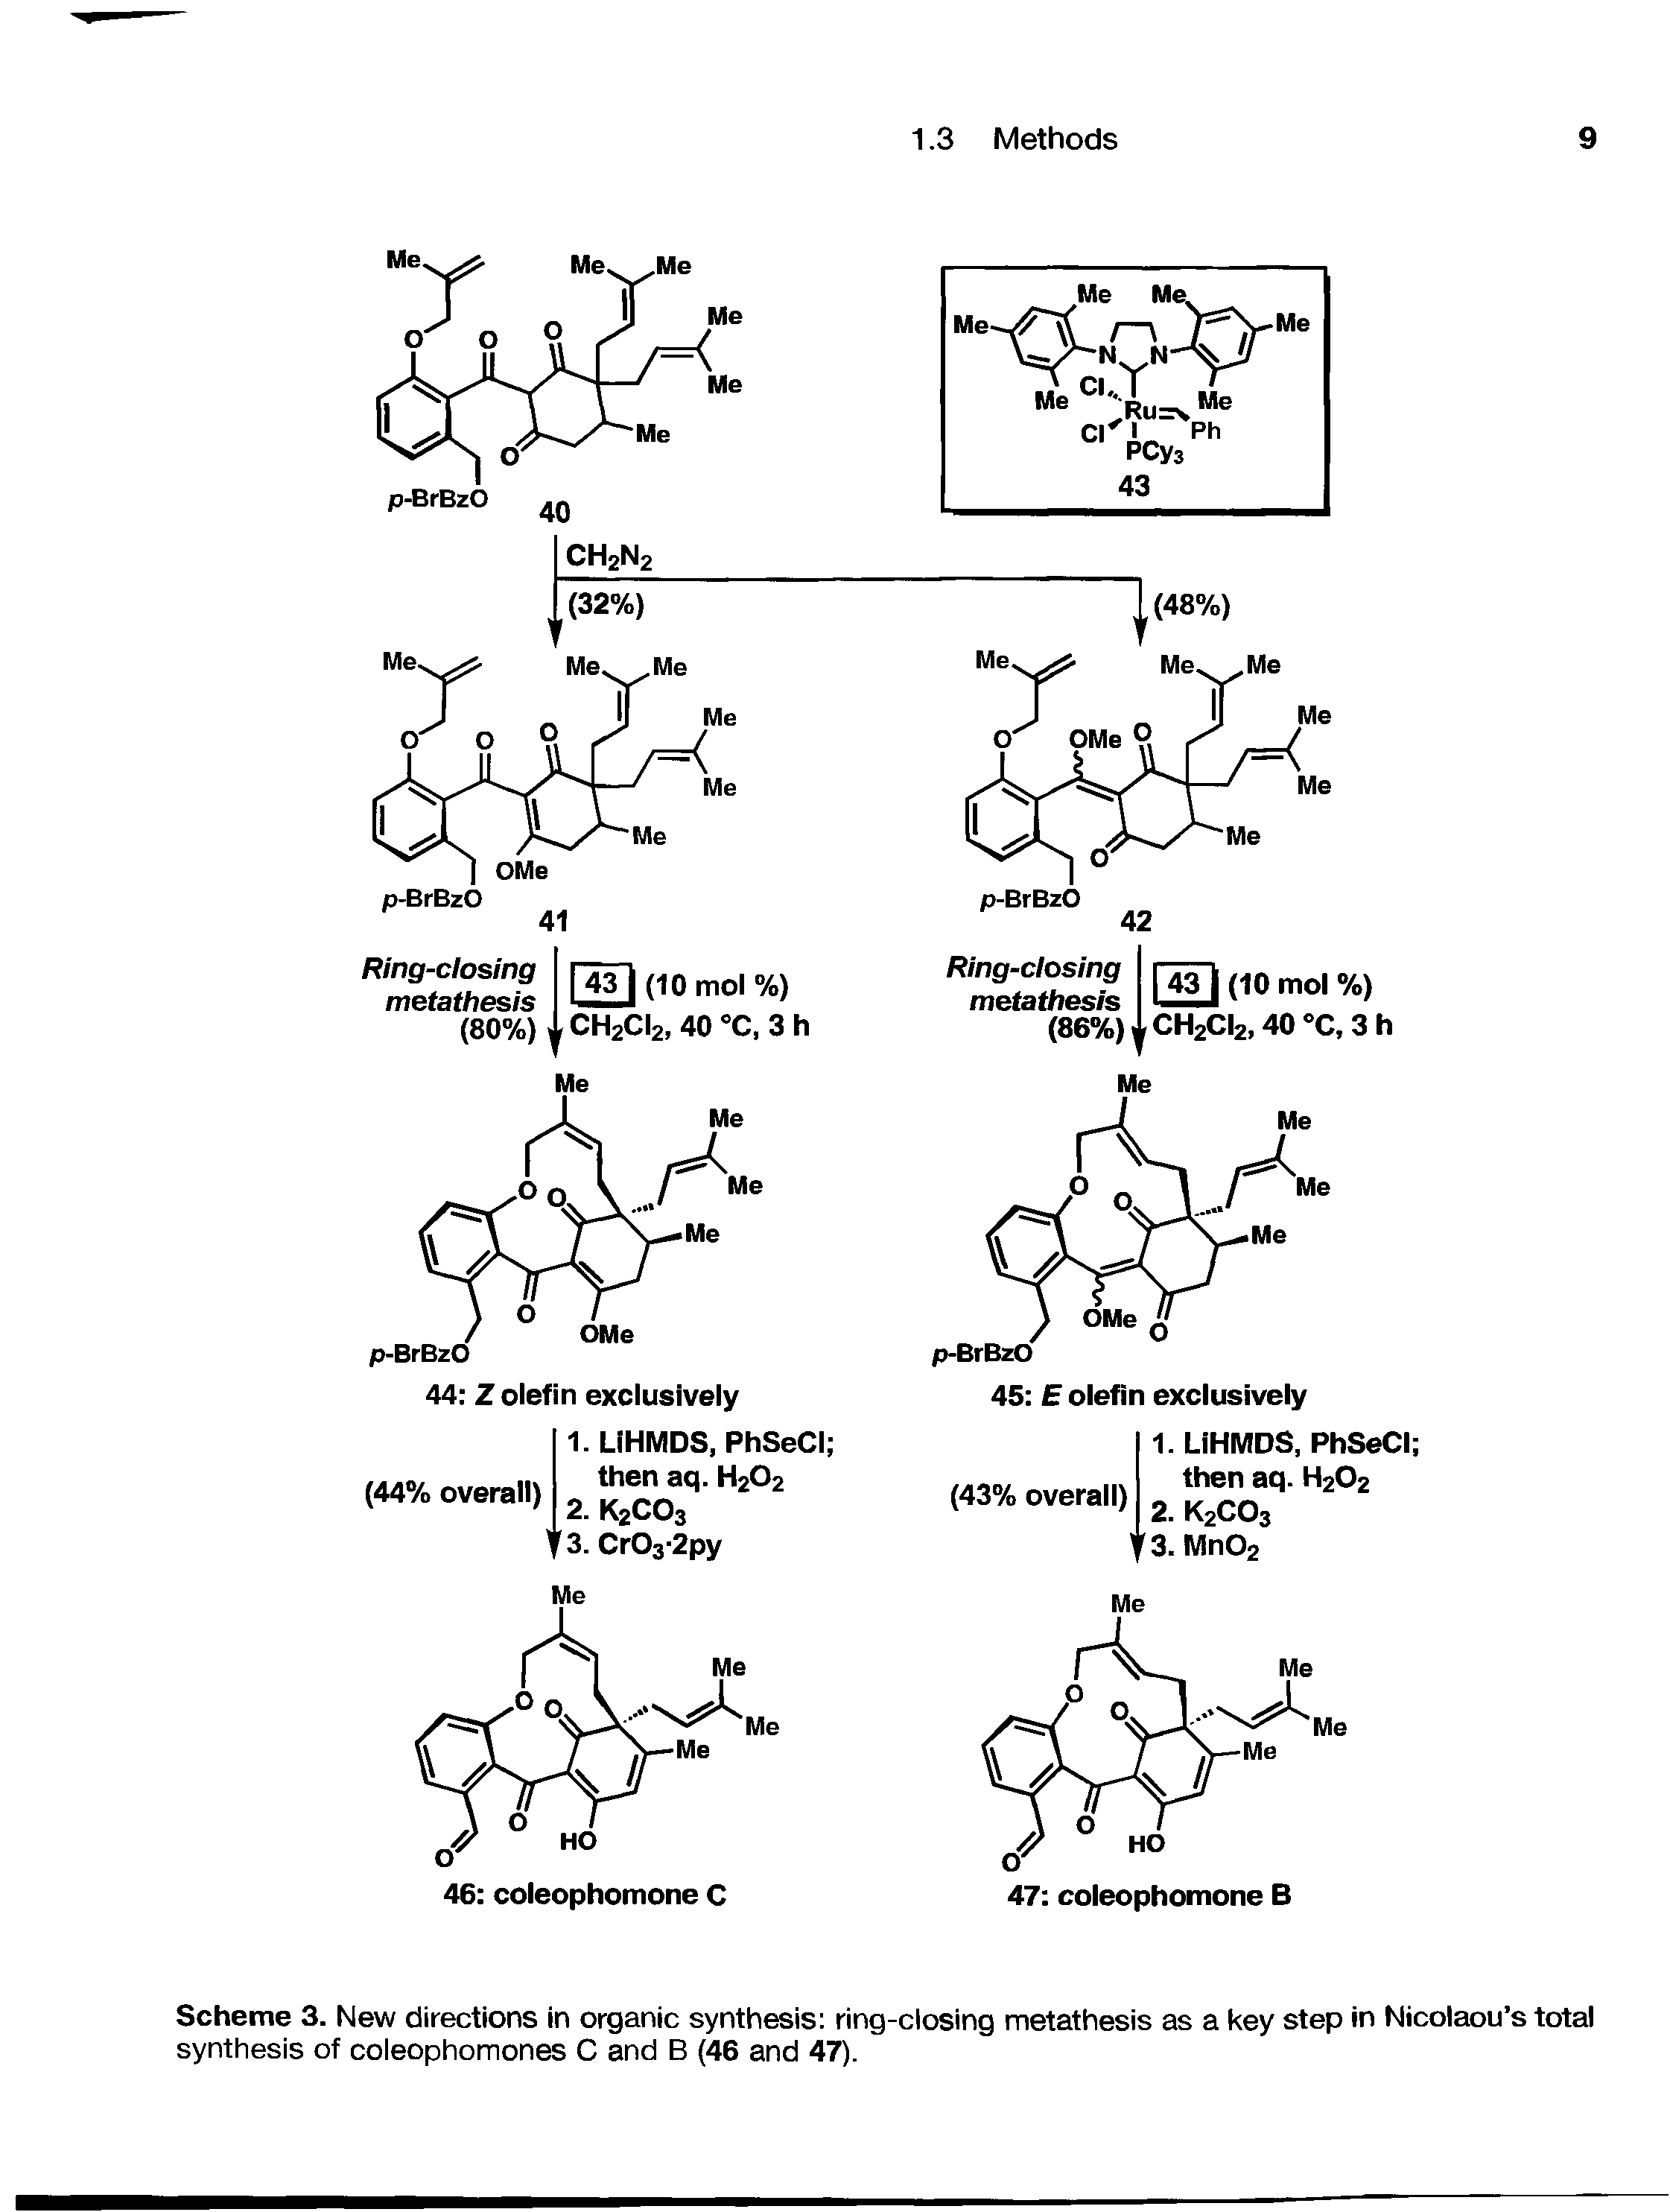 Scheme 3. New directions in organic synthesis ring-closing metathesis as a key step in Nicolaou s total synthesis of coleophomones C and B (46 and 47).